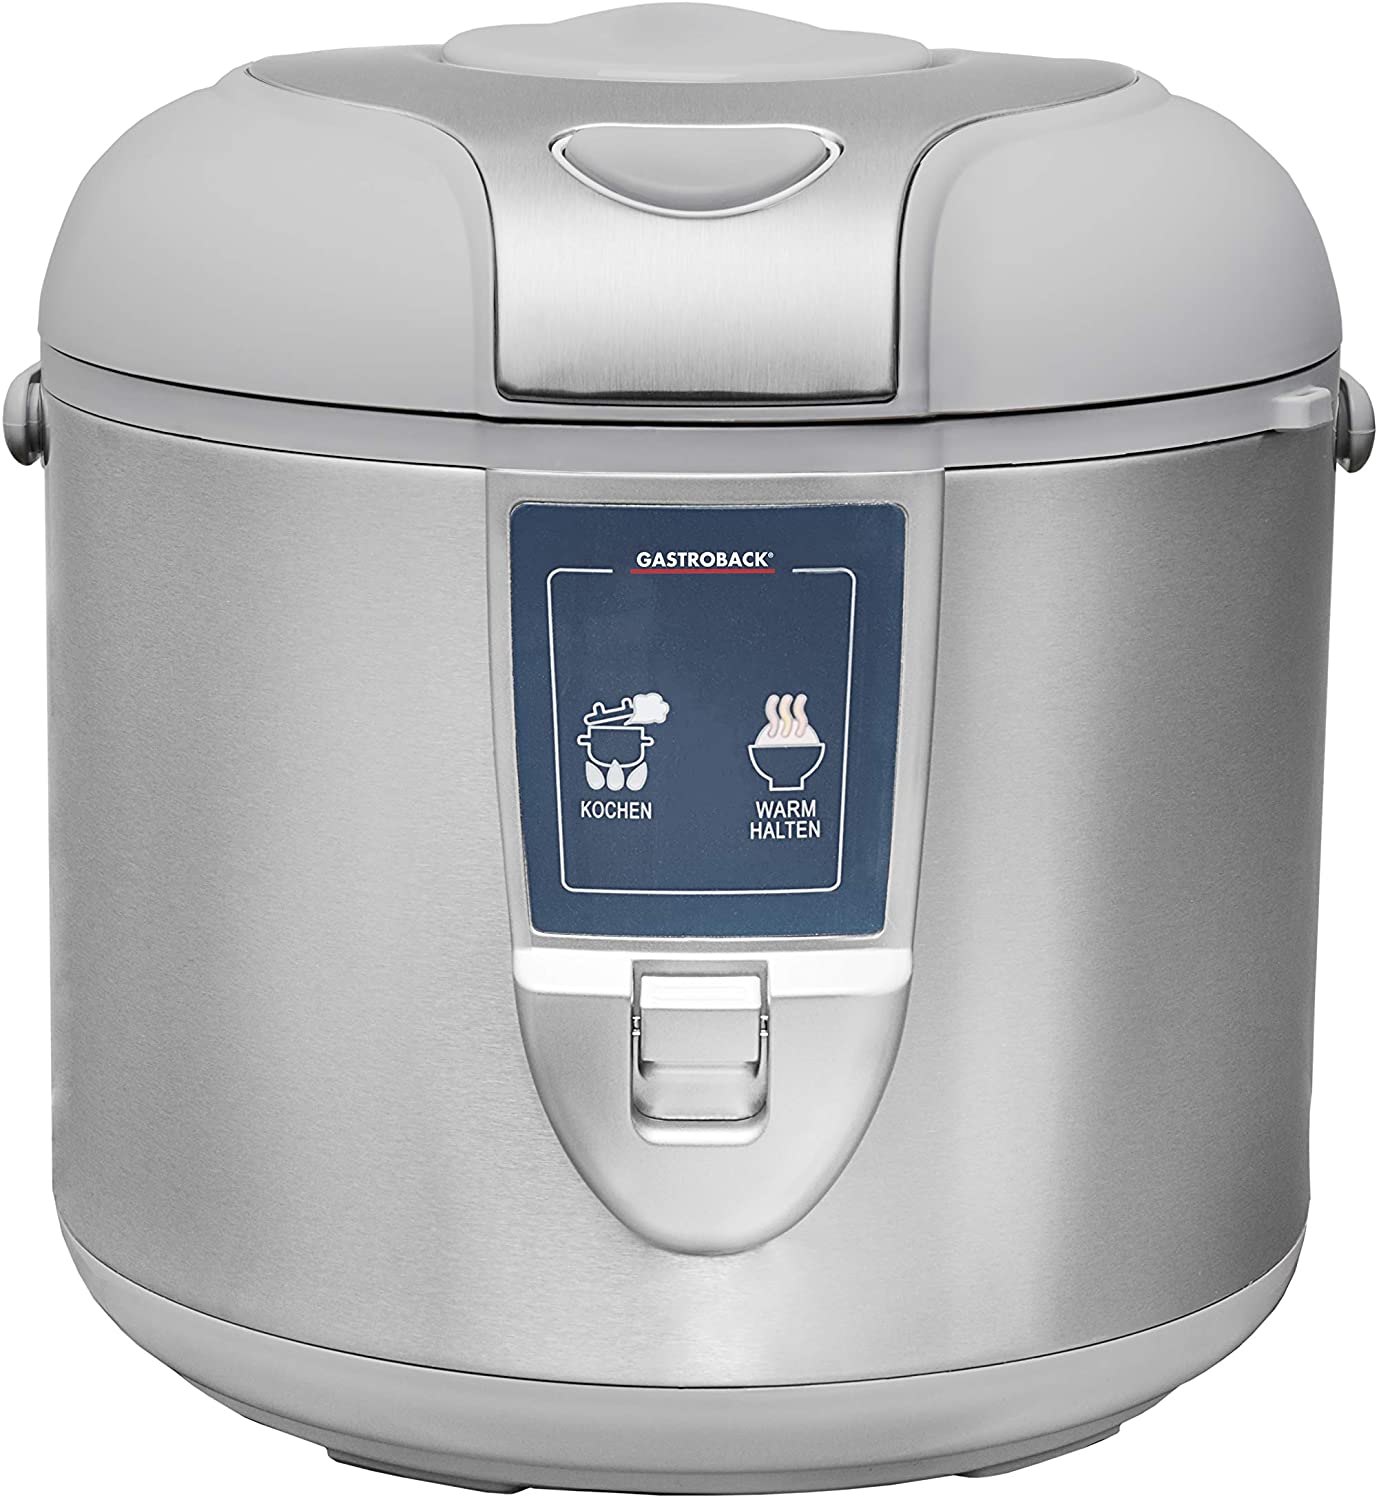 Gastroback 42518 Design Rice Cooker Pro, Automatic Shut-Off, Keep Warm Function, 5 Litres, Non-Stick, 700 Watt, Stainless Steel, 5 Litres